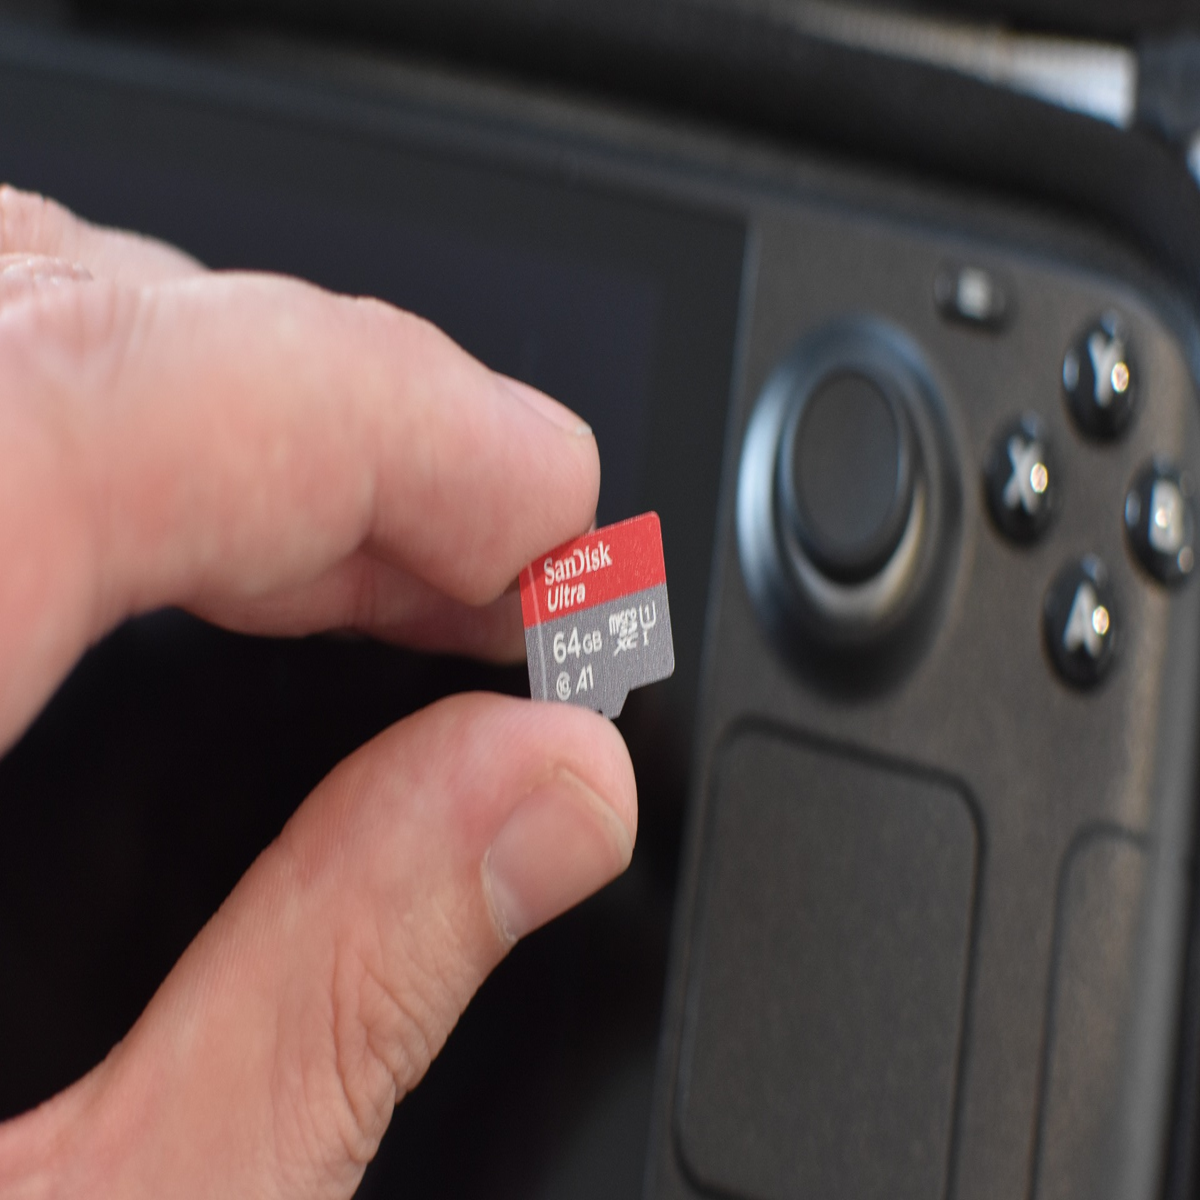 The best value Steam Deck memory card is down to £37 for 512GB